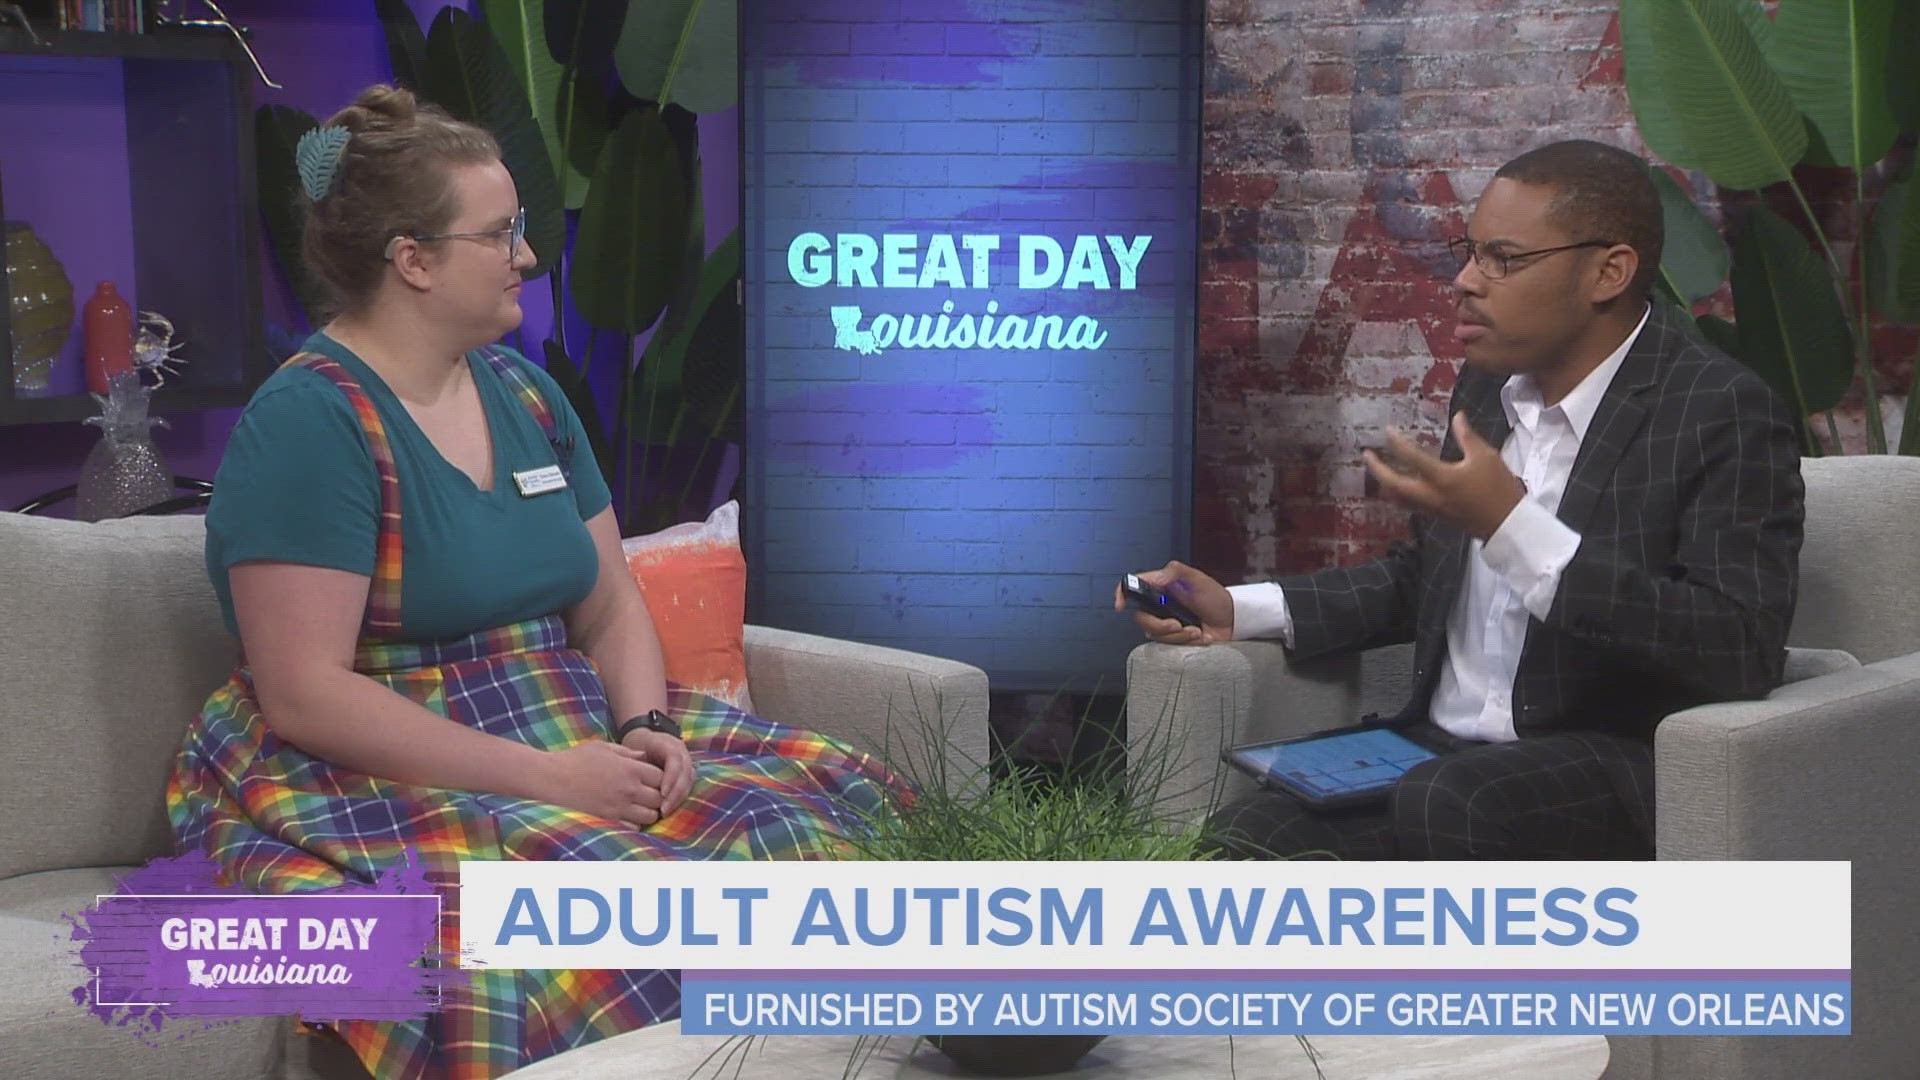 The Autism Society of Greater New Orleans joins us for a conversation on Adult Autism Awareness Day.